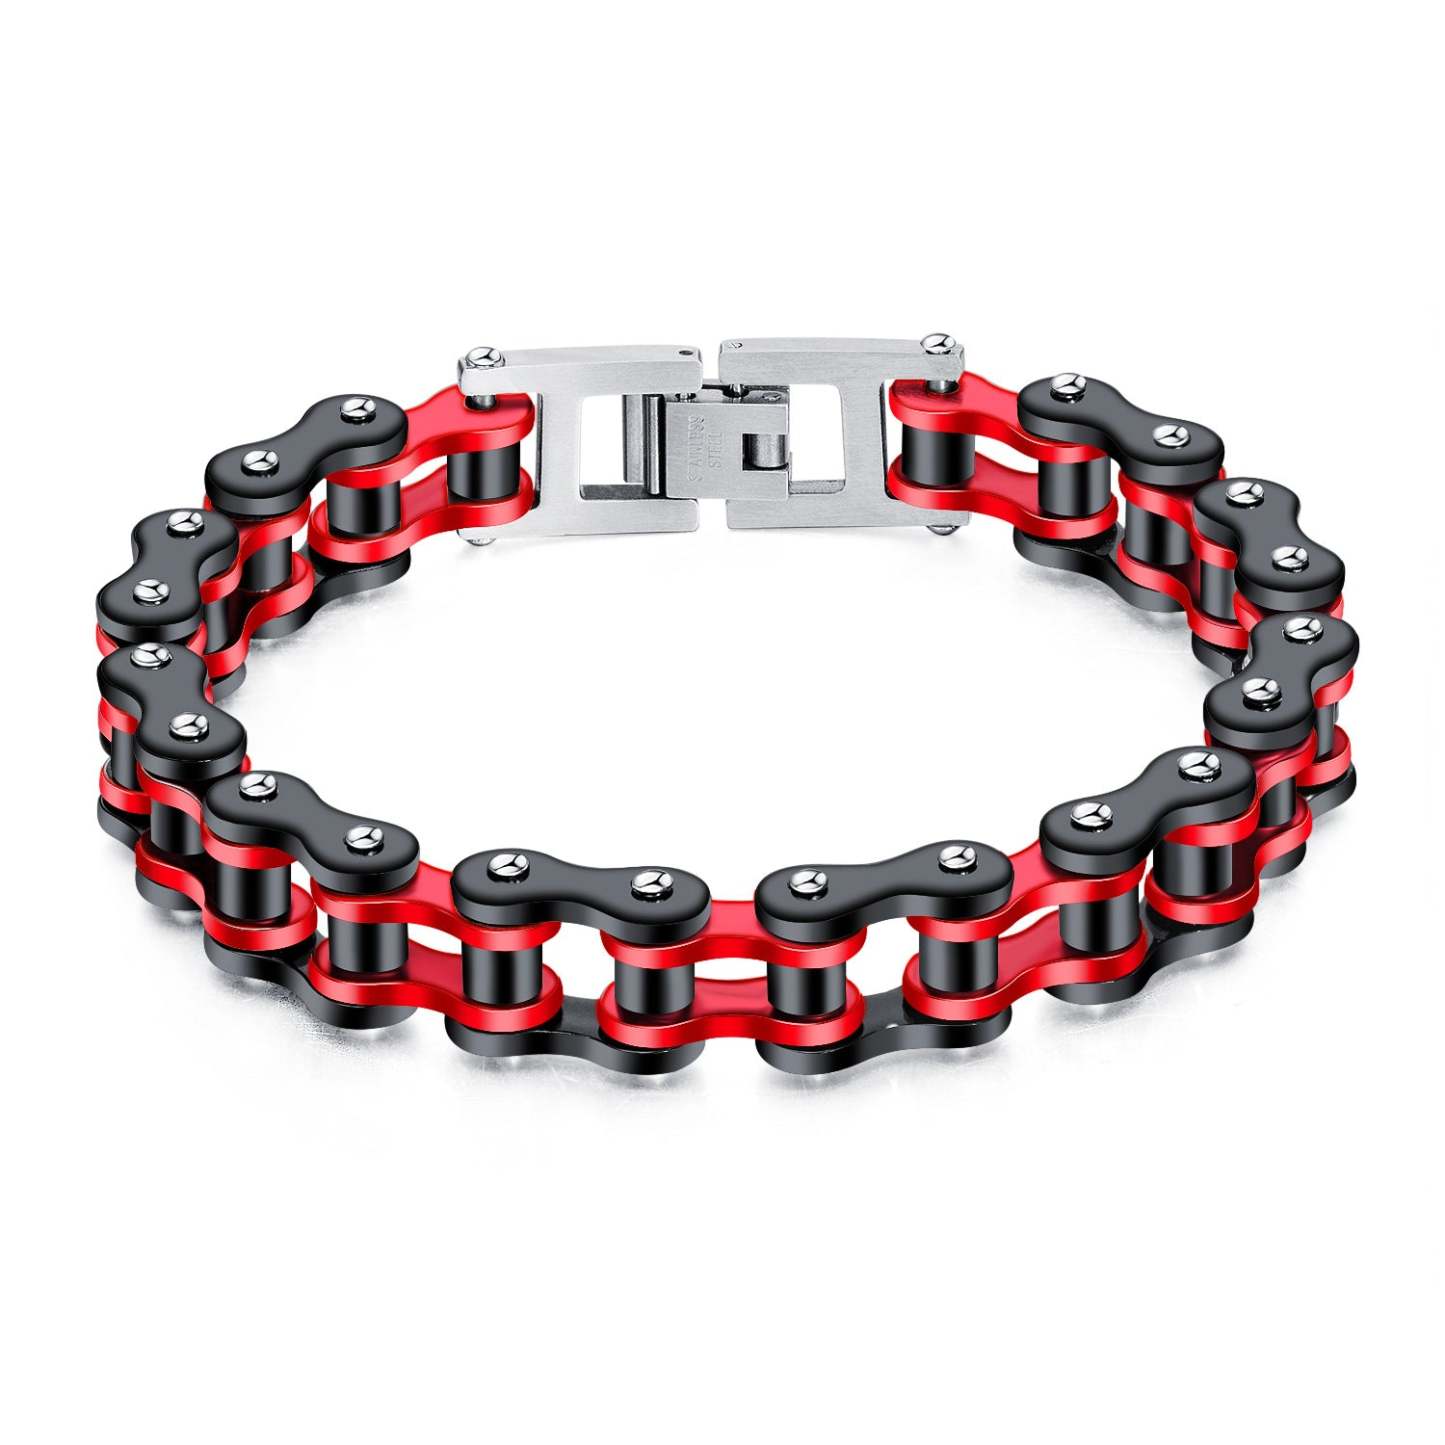 Retro Bicycle Chain Bracelet Black Gold Gifts for Fashion Men - soufeelmy